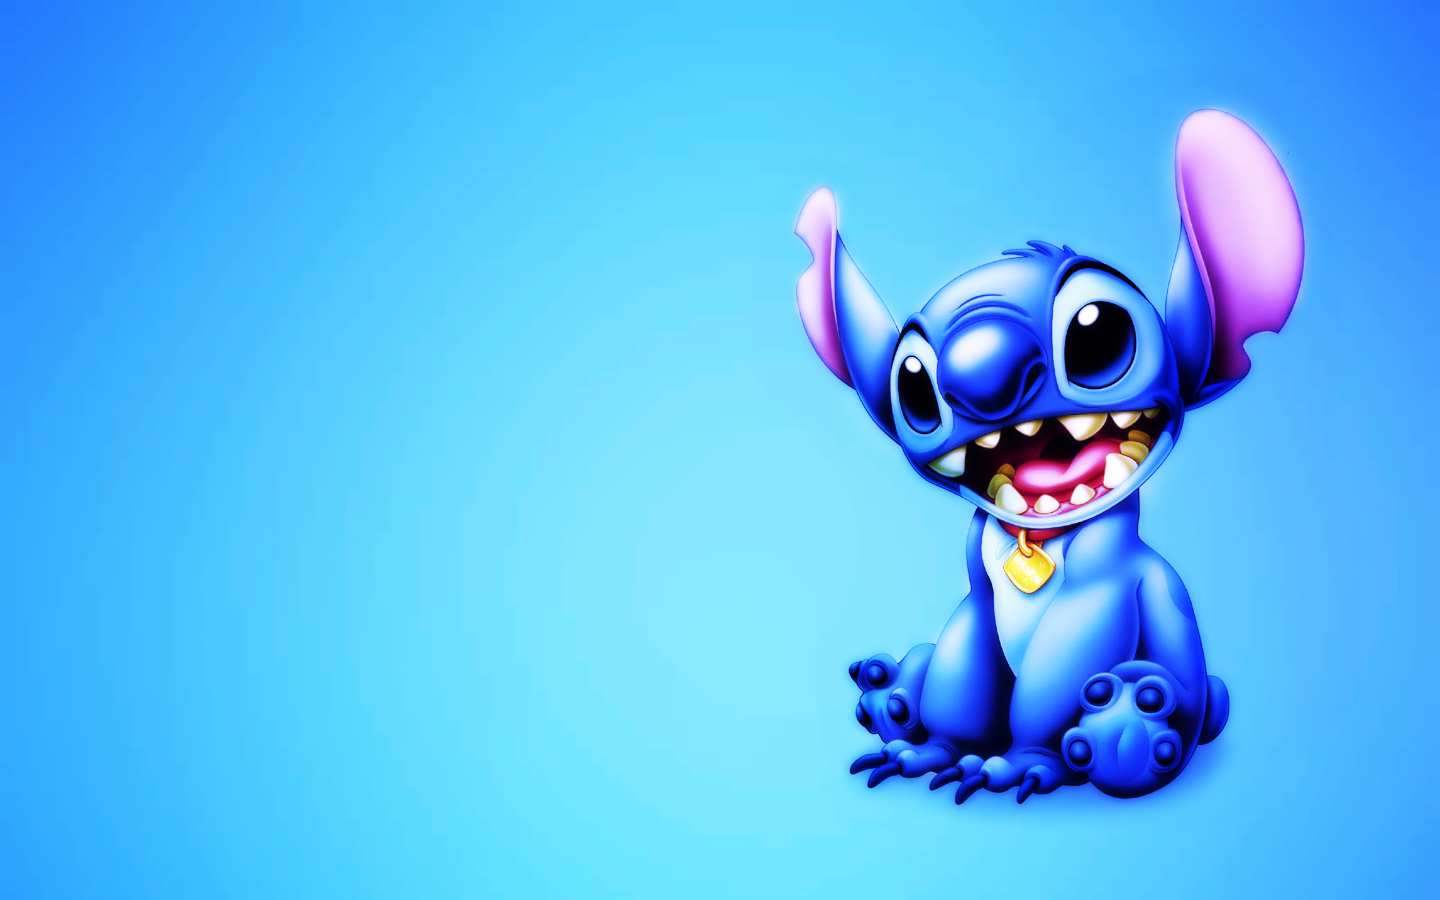 Stitch and Angel wallpaper by Dgk113088  Download on ZEDGE  0bf8